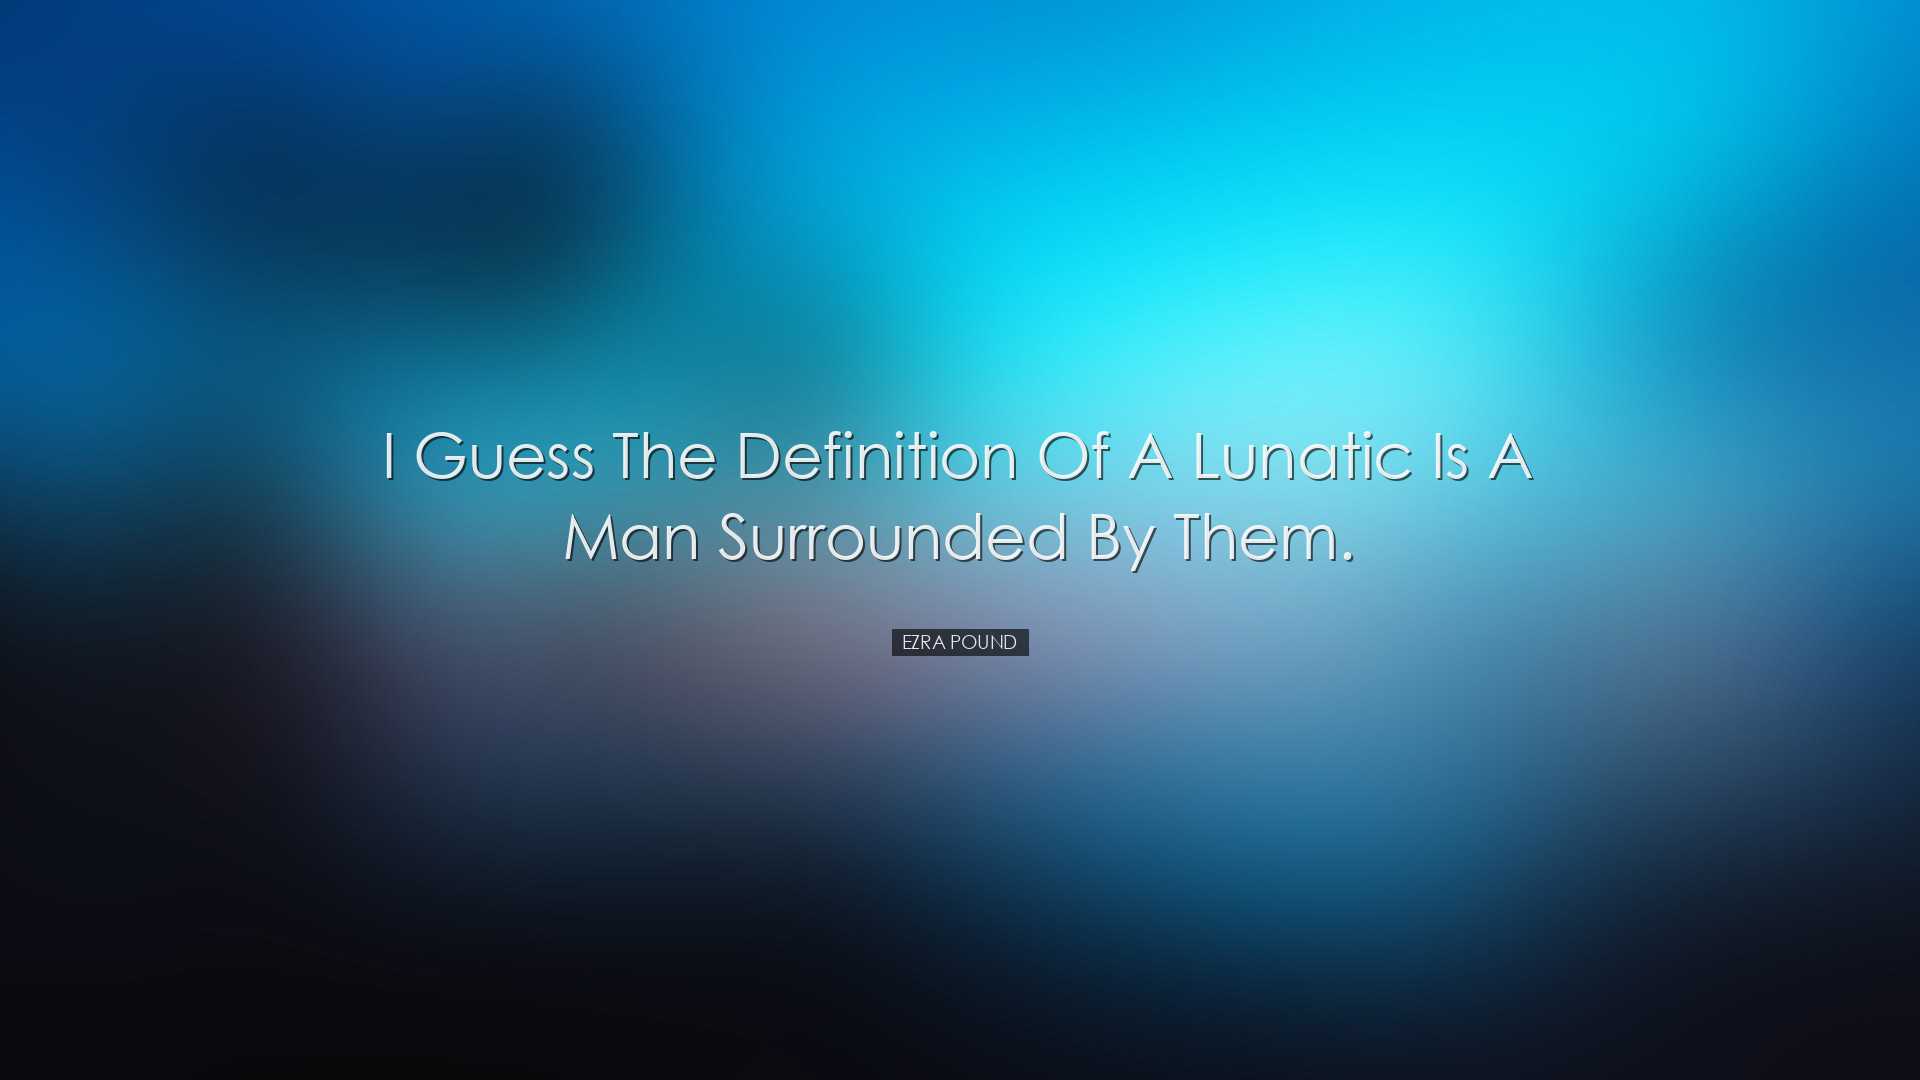 I guess the definition of a lunatic is a man surrounded by them. -